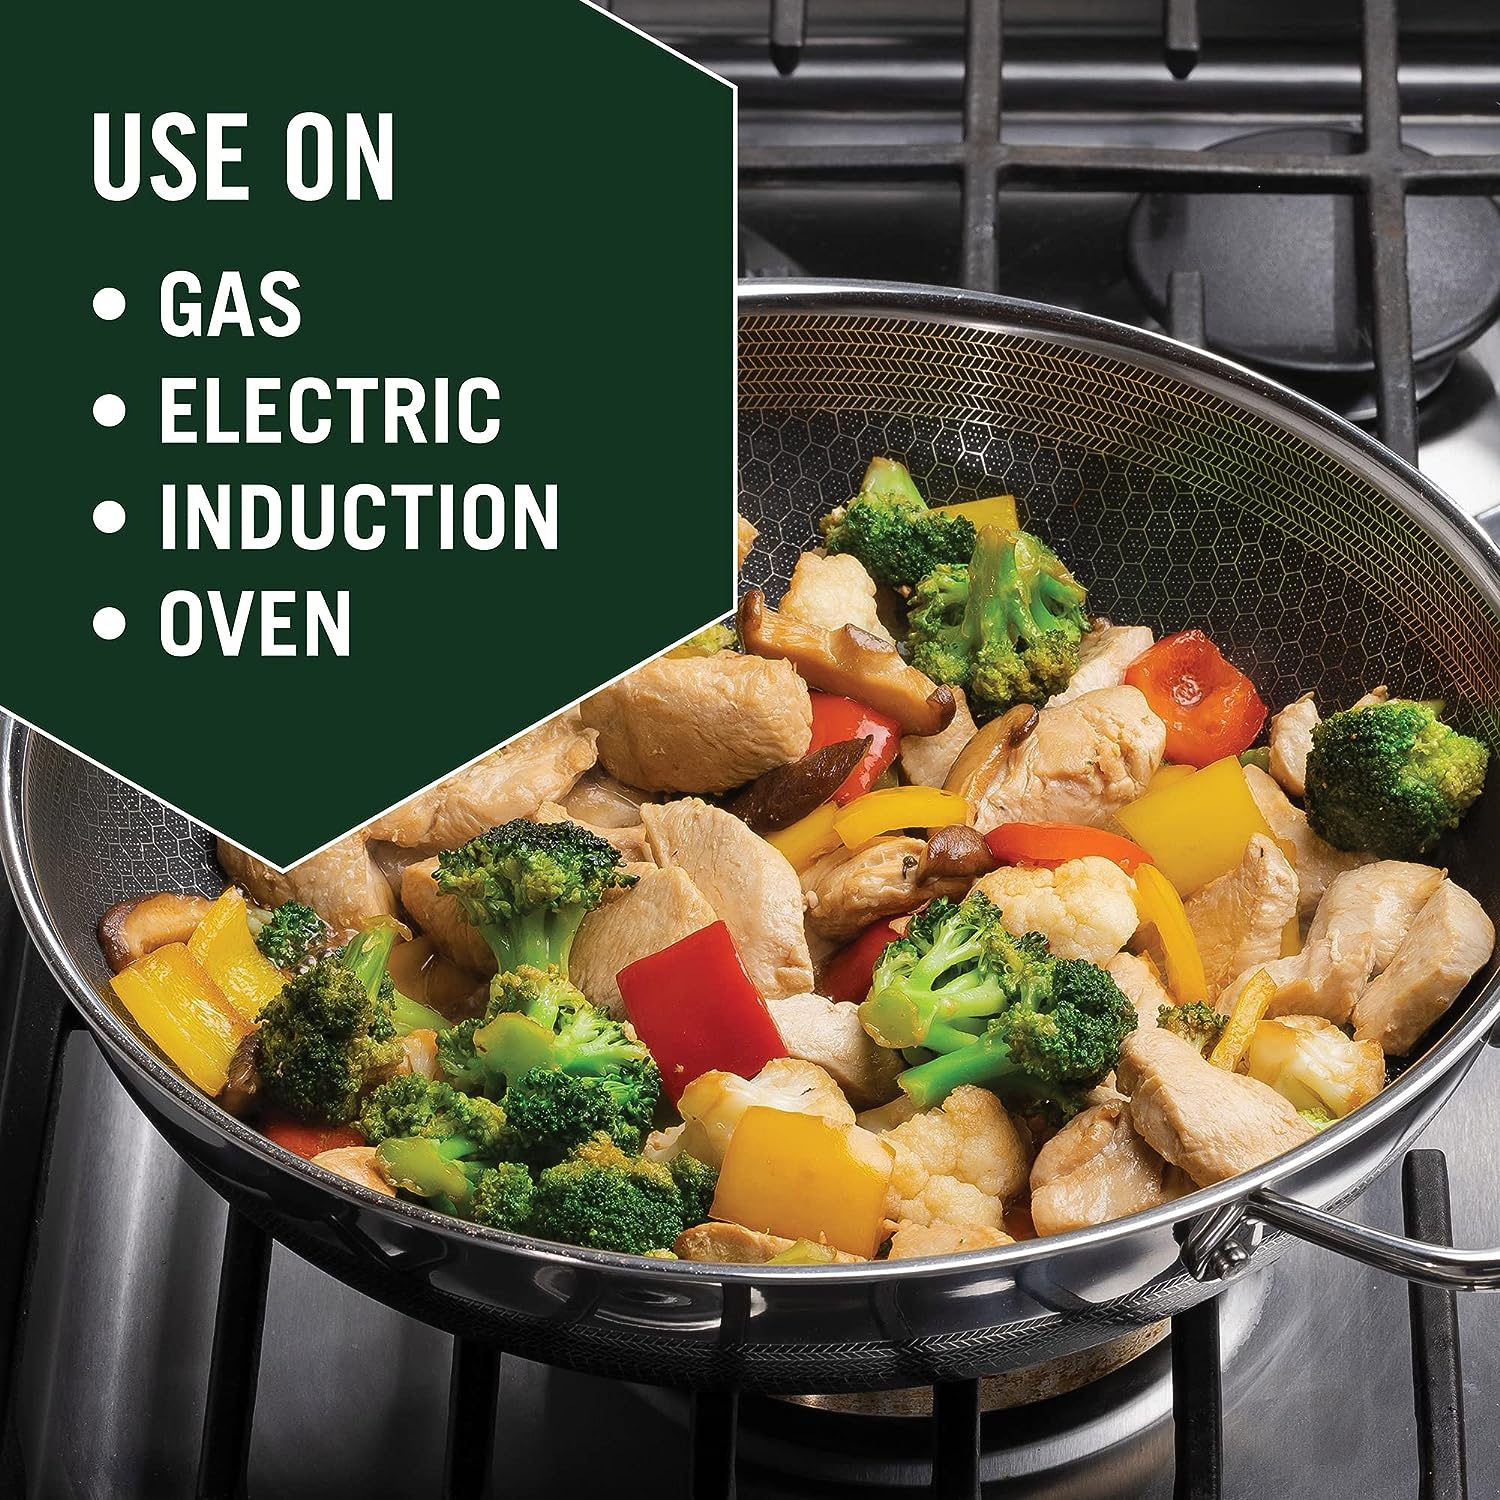  HexClad Hybrid Nonstick 12-Inch Fry Pan with Tempered Glass  Lid, Stay-Cool Handle, Dishwasher and Oven Safe, Induction Ready,  Compatible with All Cooktops: Home & Kitchen